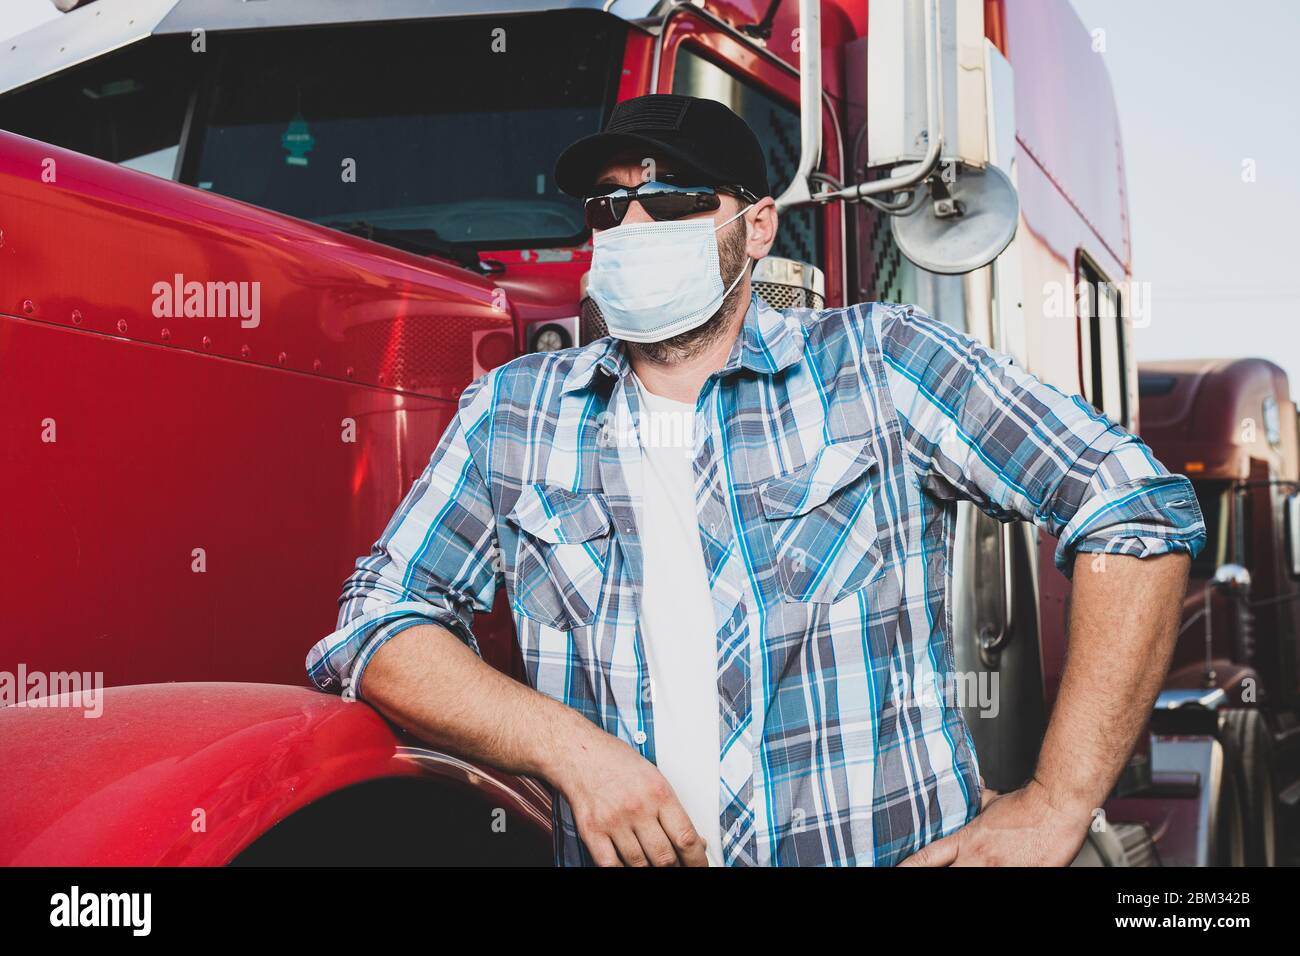 semi truck professional driver on the job in casual clothing wears safety medical face mask. Confident looking trucker stands next to red big rig Stock Photo